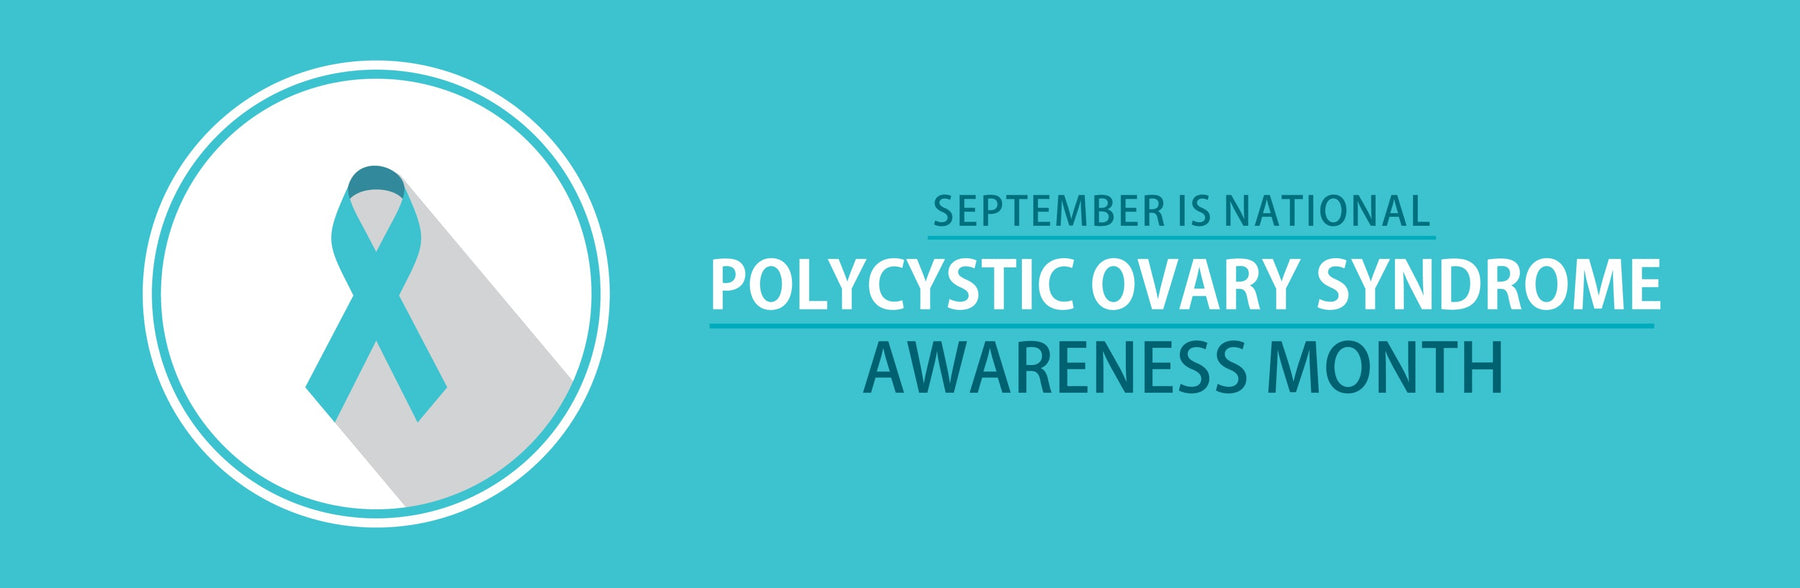 Polycystic Ovary Syndrome Awareness Month